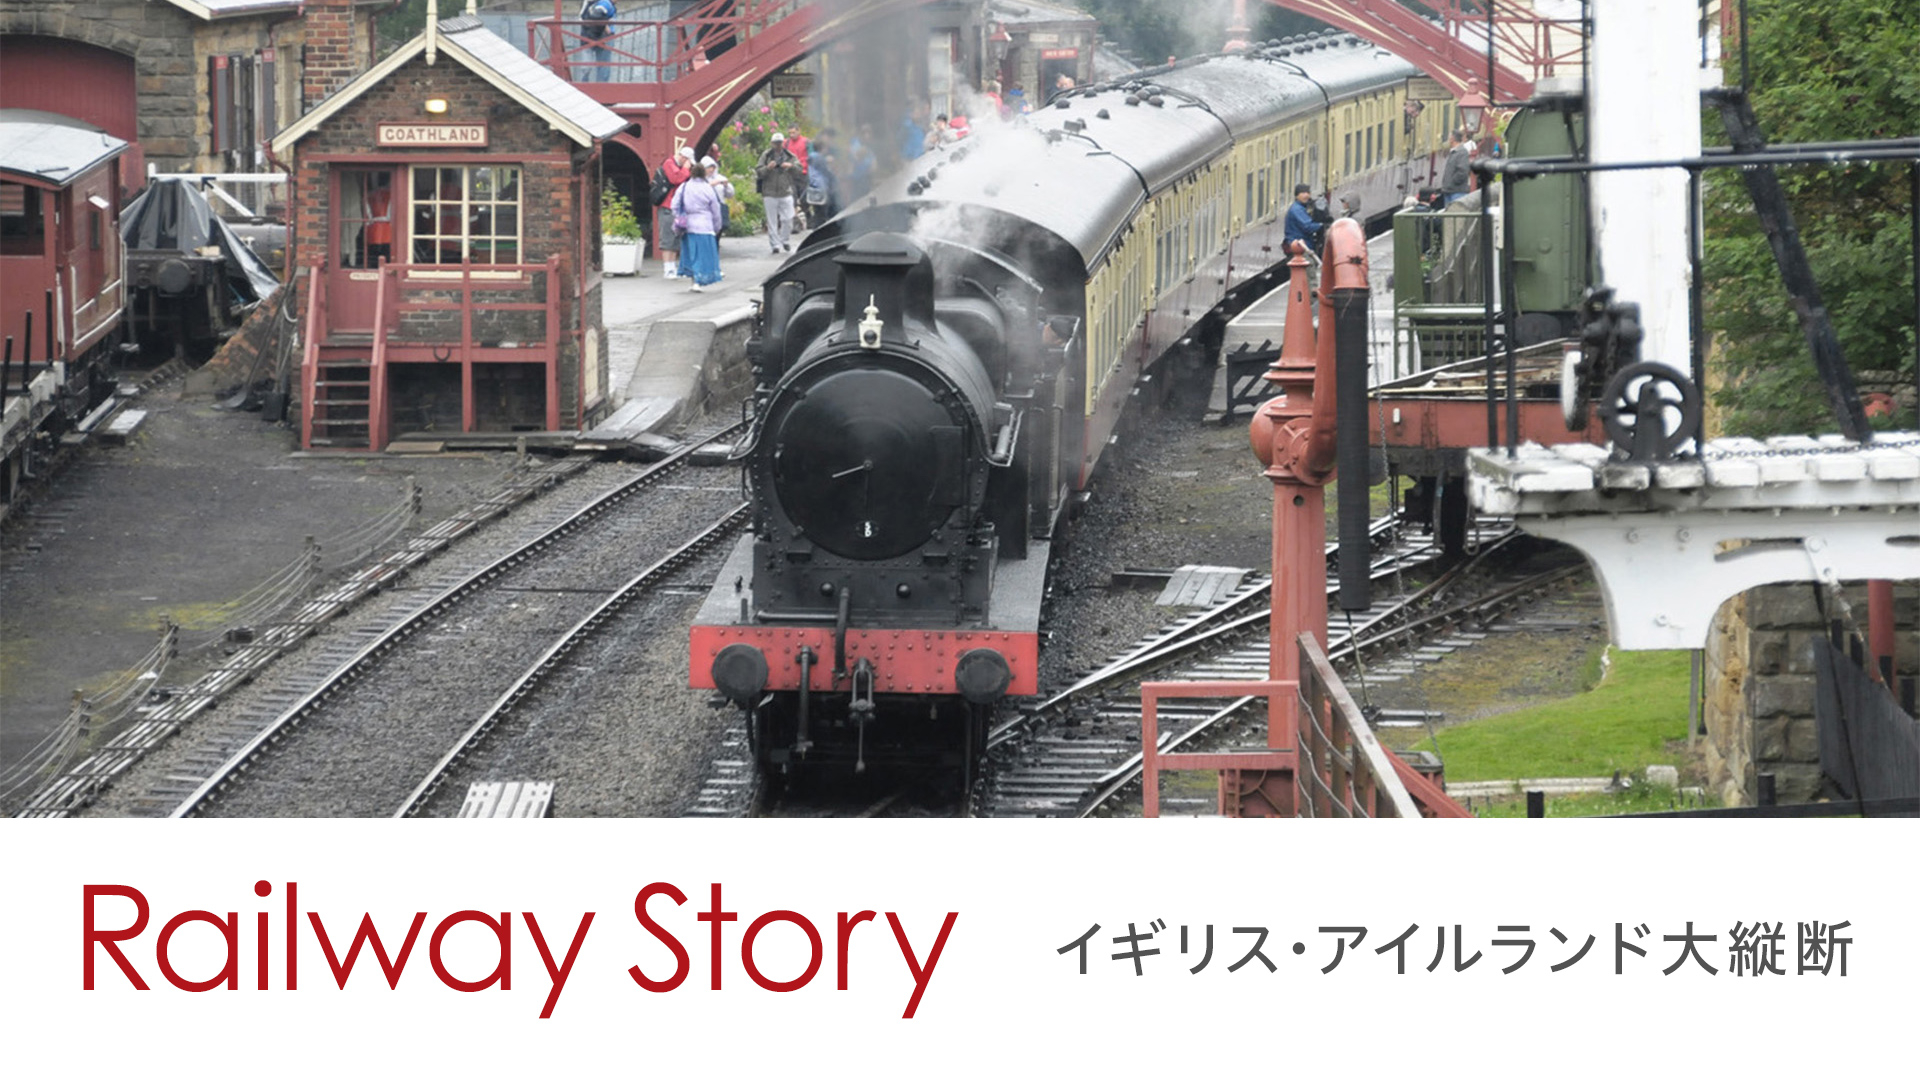 WOWOW Railway Story ヨーロッパ横断4000キロ オリエント急行の旅 Part.2 [DVD]：Come to Store - DVD